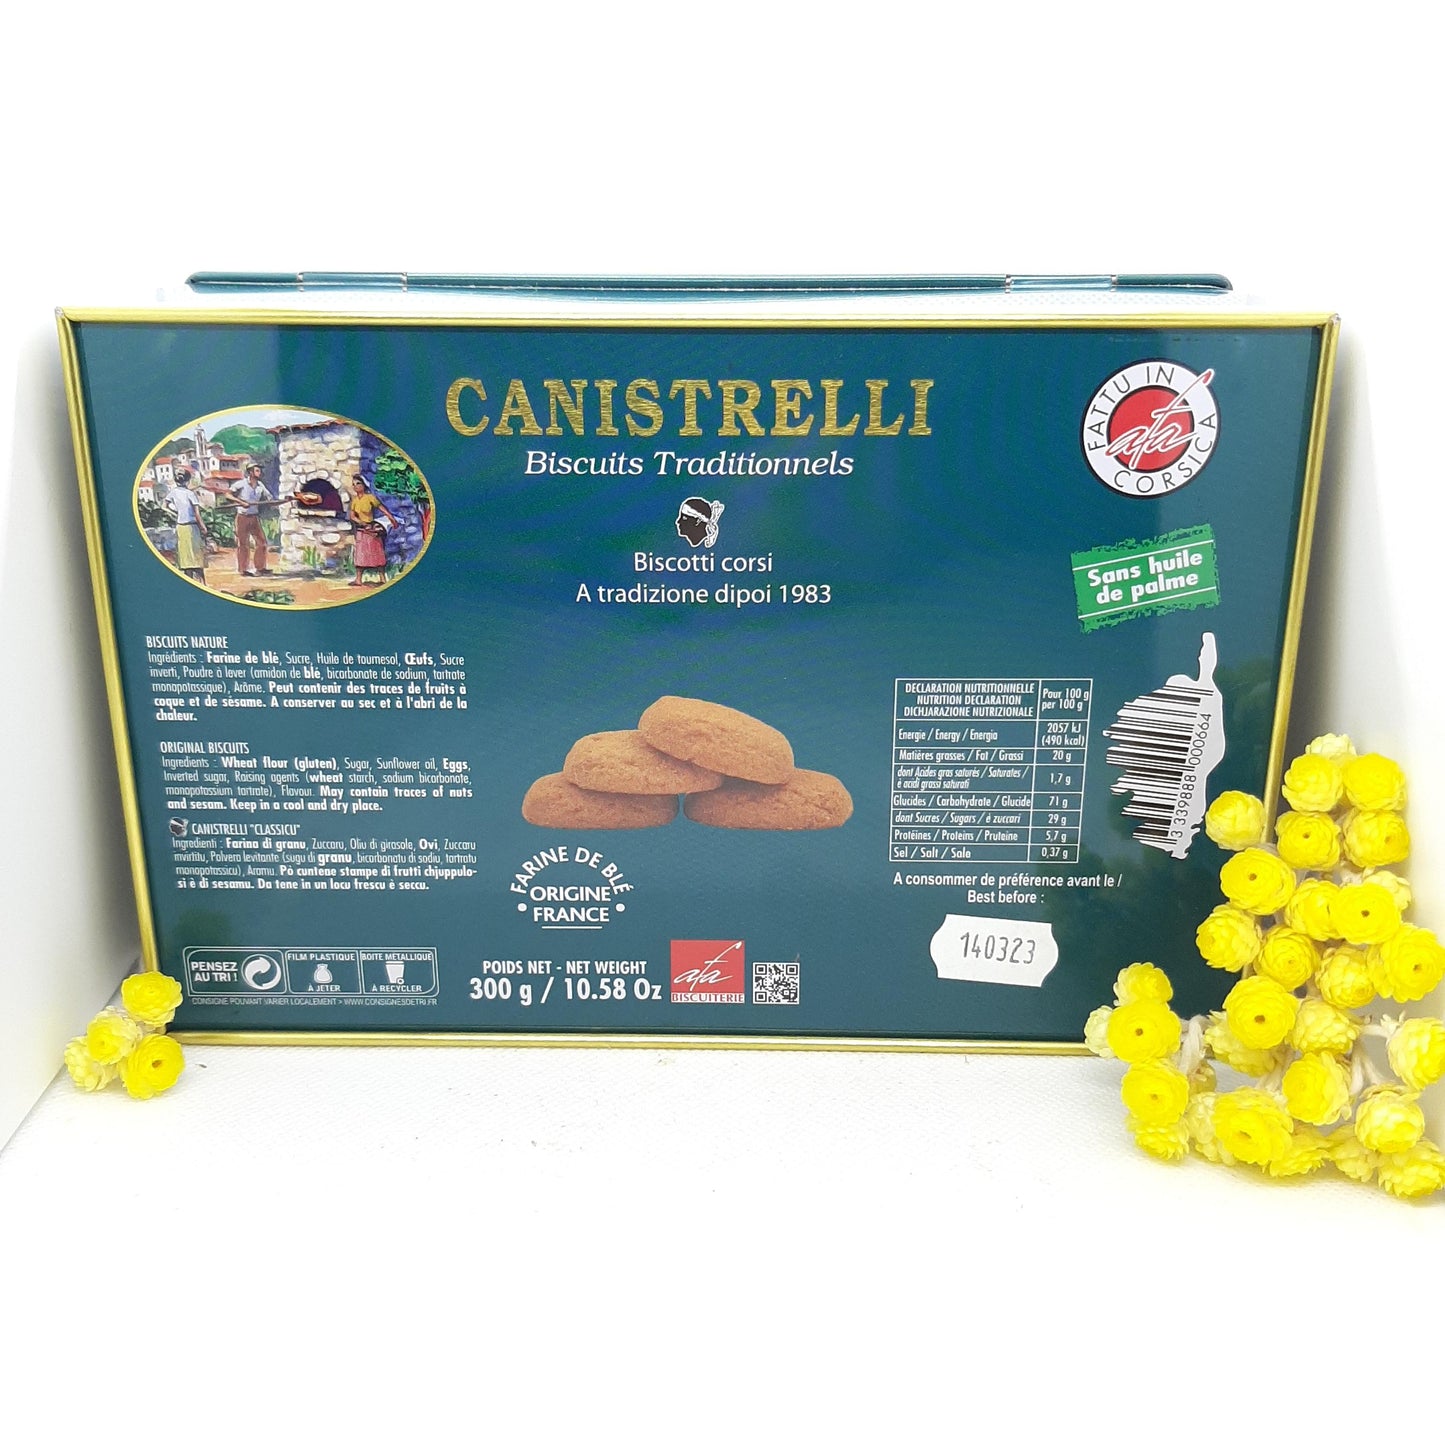 Canistrelli - Biscuits Traditionnels - Biscuiterie d'Afa